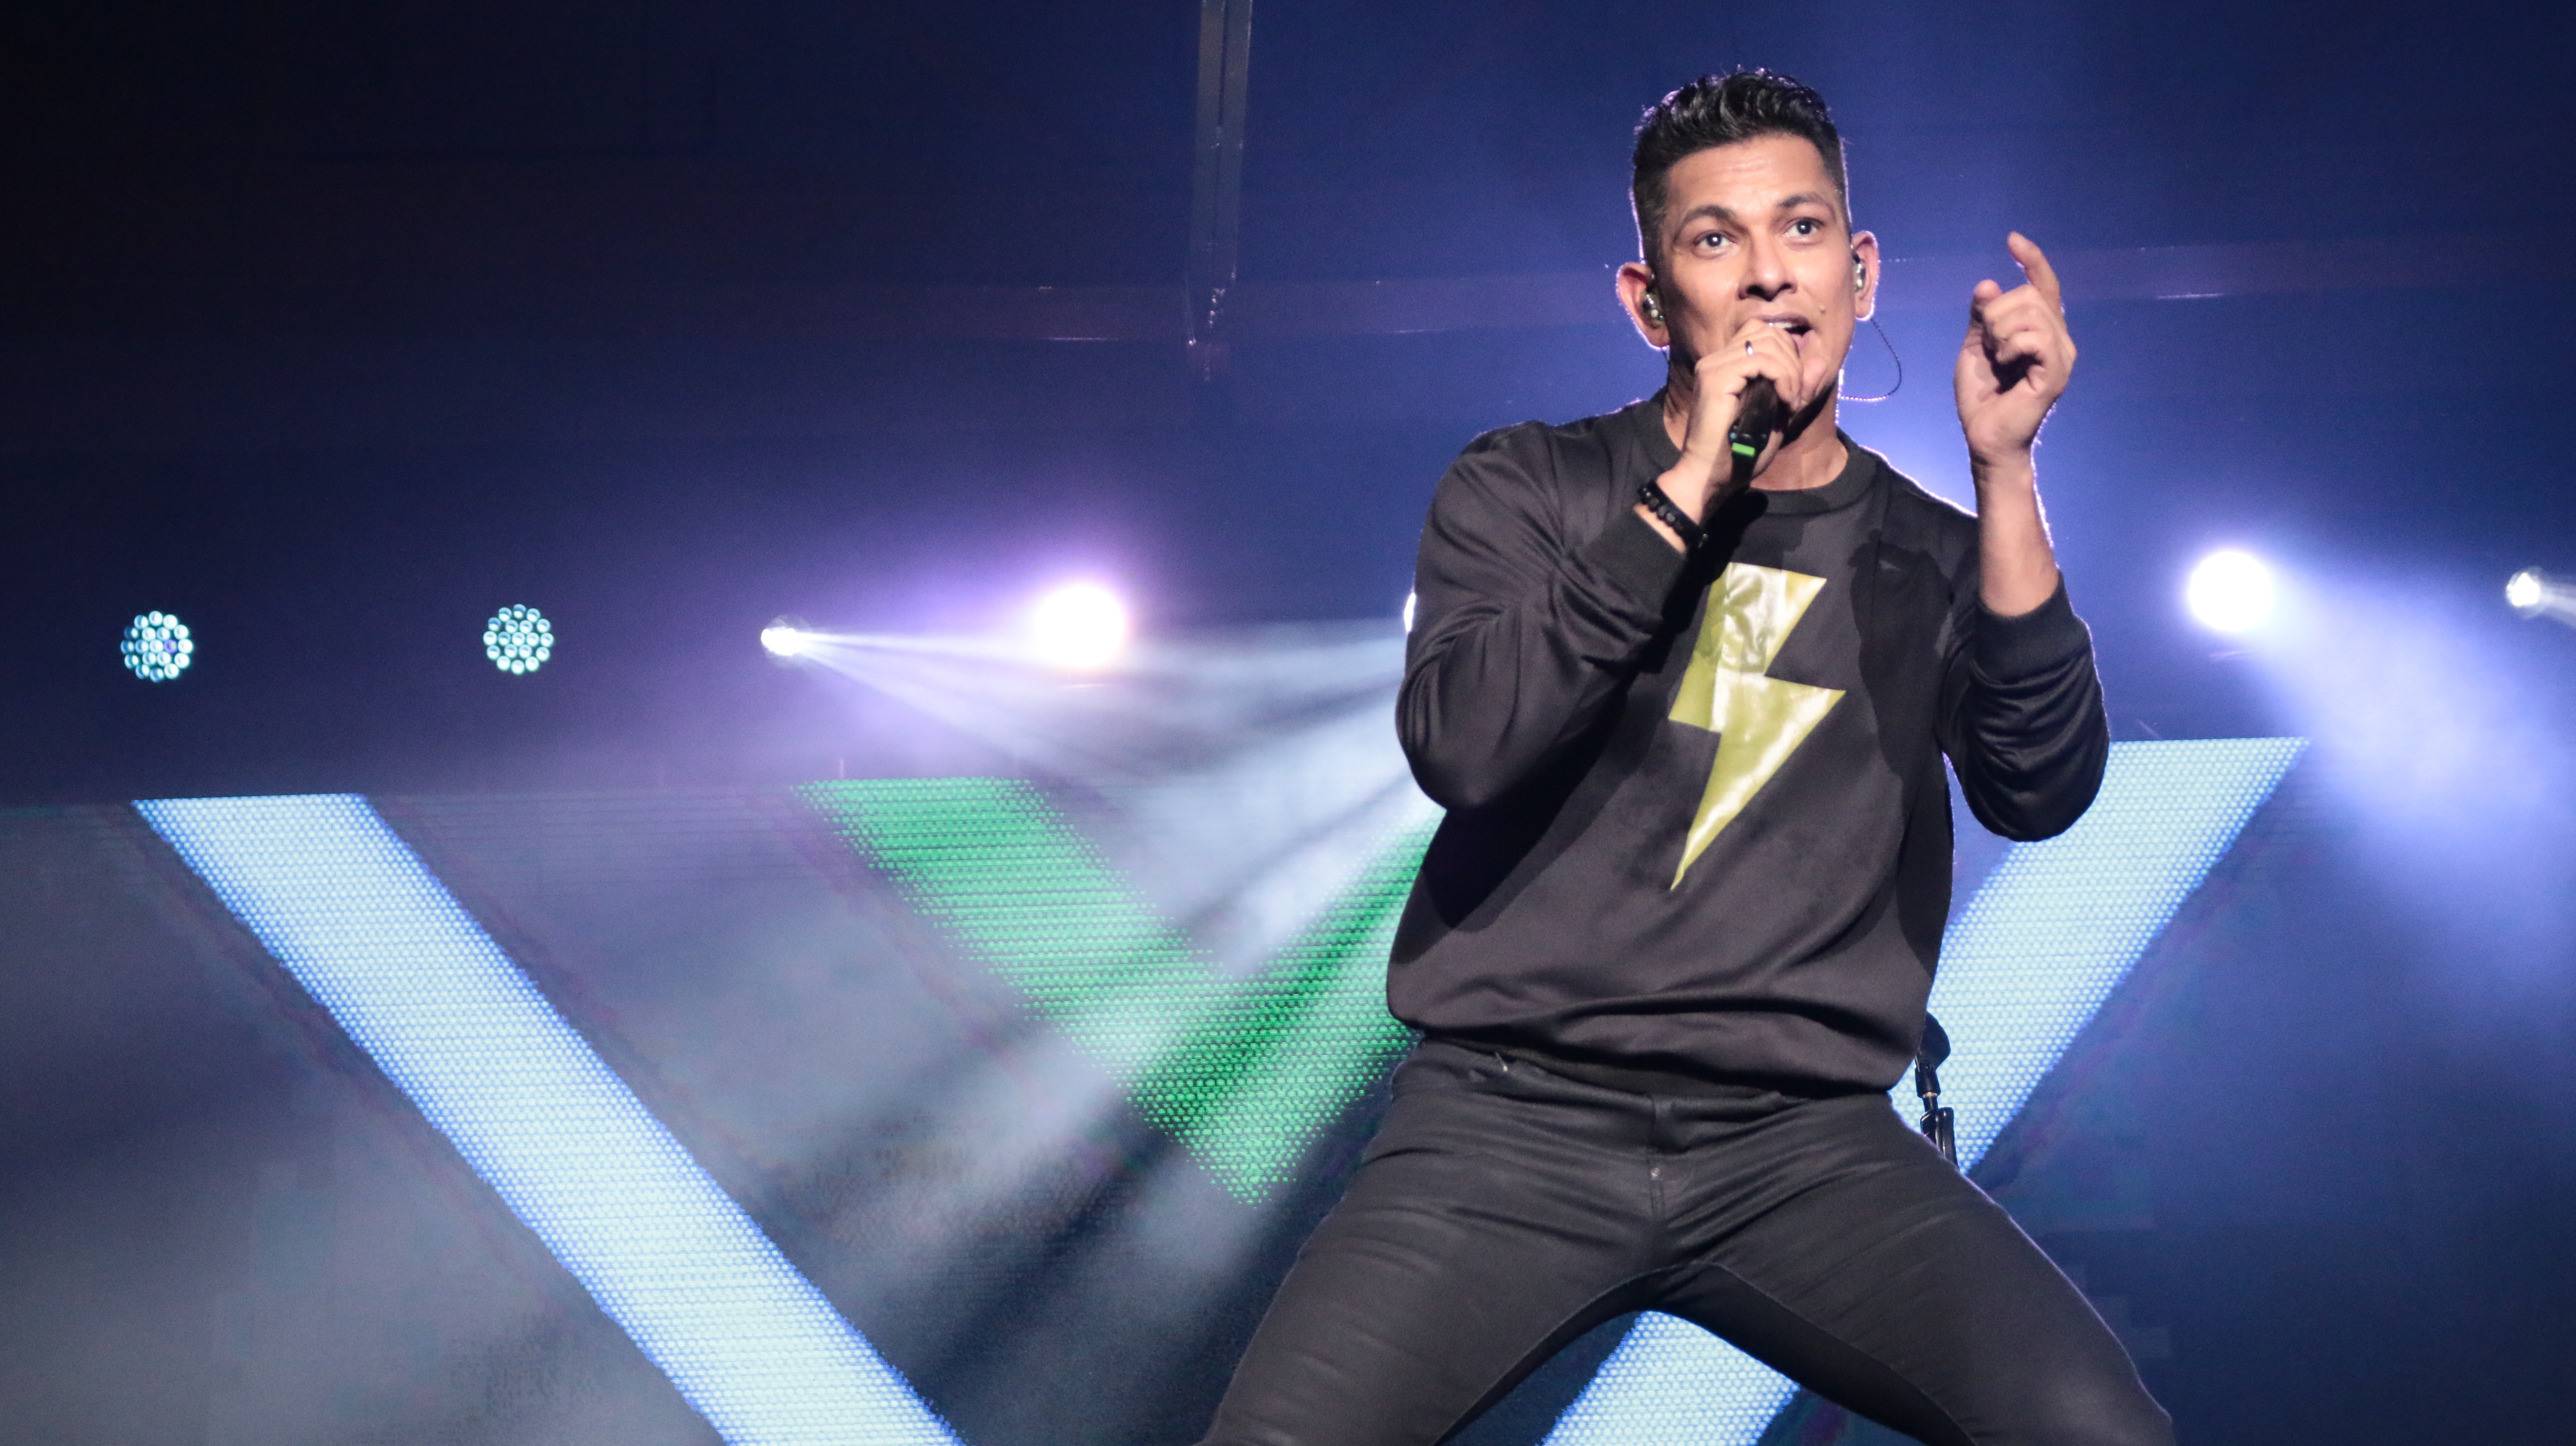 IN PHOTOS: Gary Valenciano displays ‘pure energy’ at comeback concert